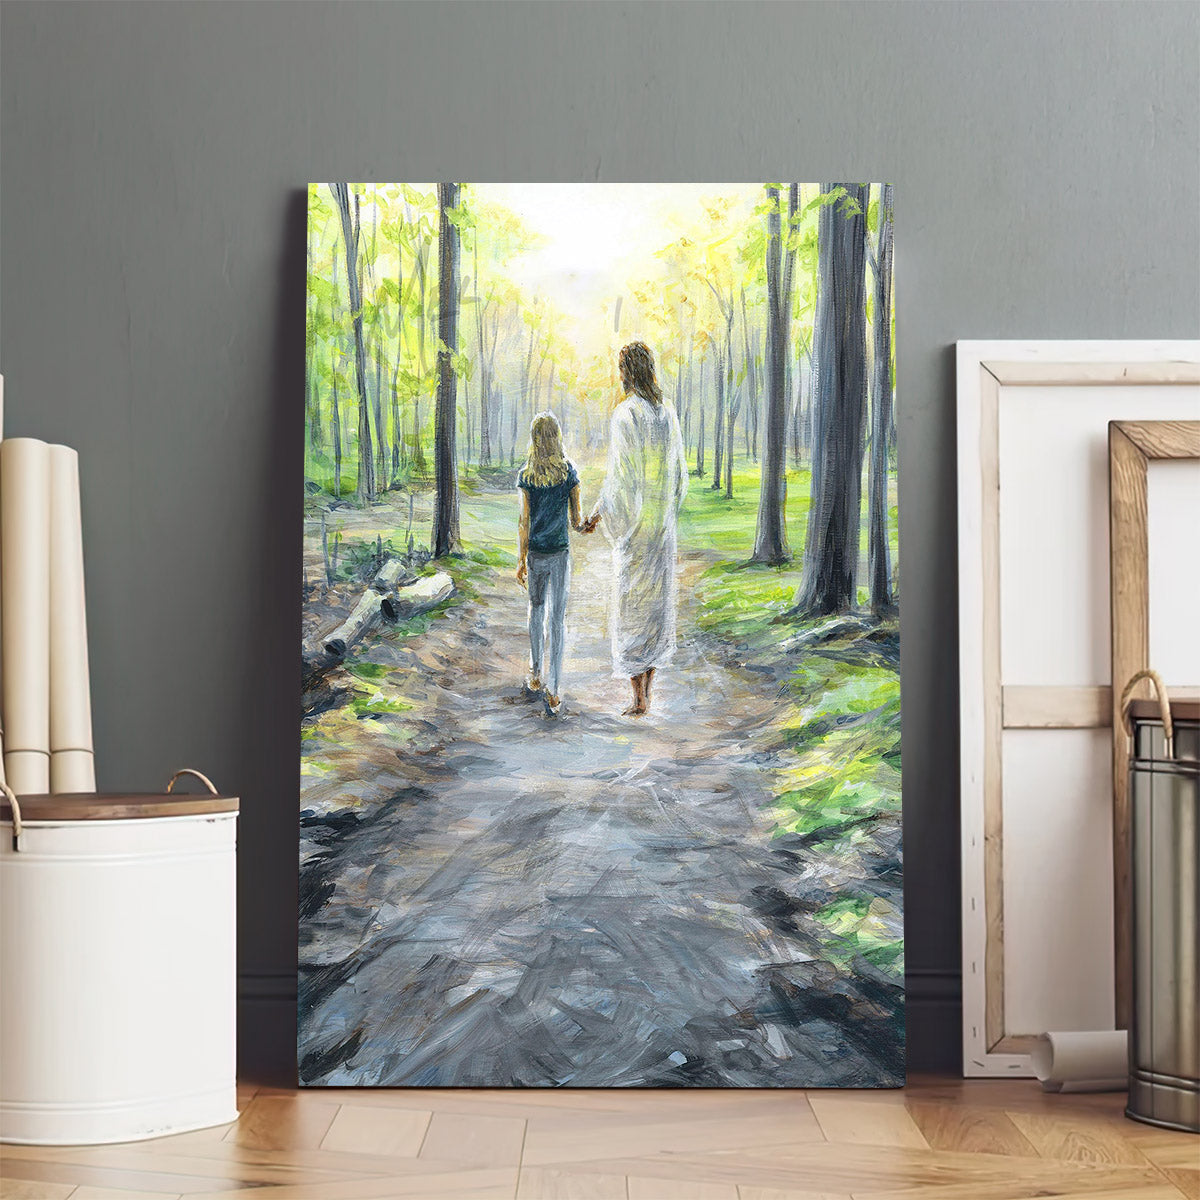 Walking With Jesus Painting Or Young Girl On Forest - Jesus Canvas Pictures - Christian Wall Art